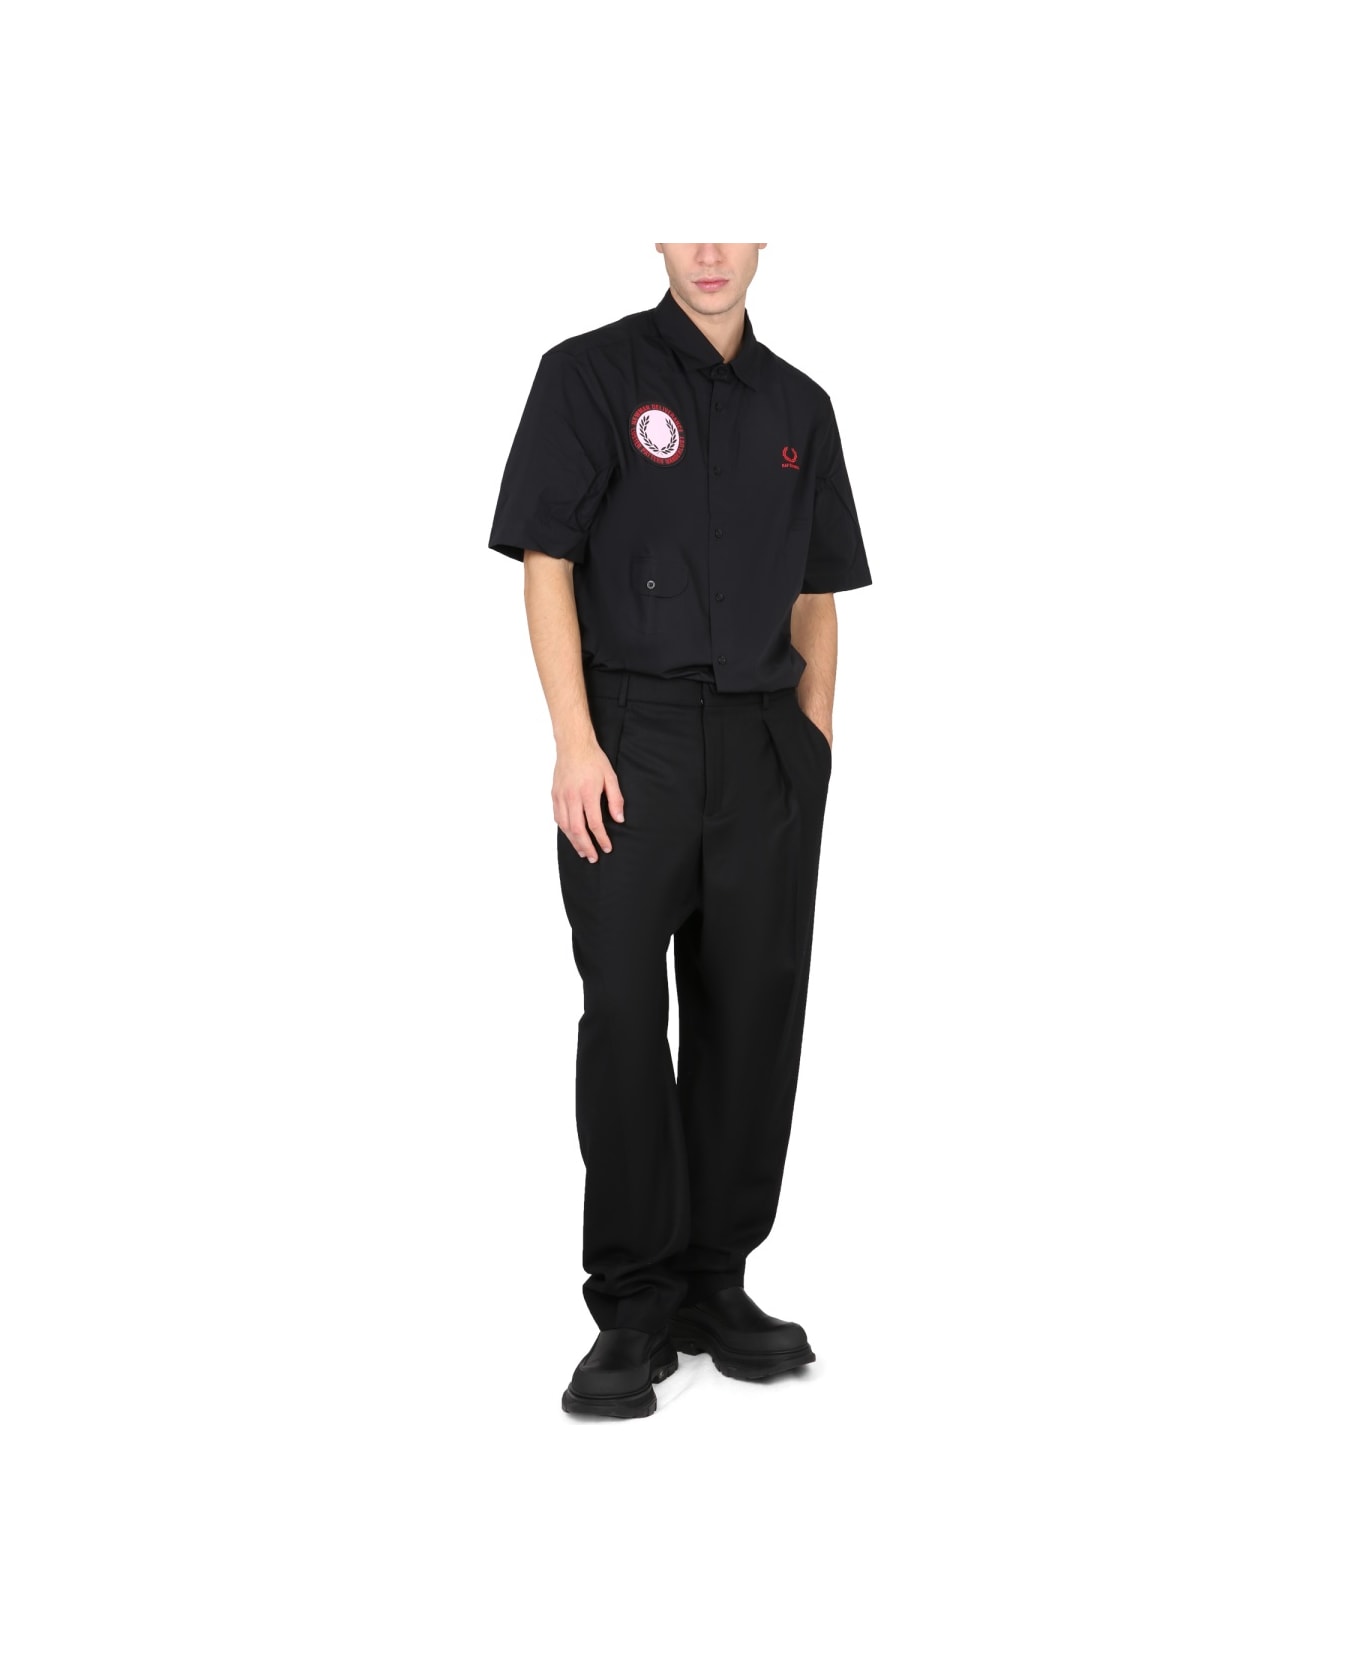 Fred Perry by Raf Simons Shirt With Patch - BLACK